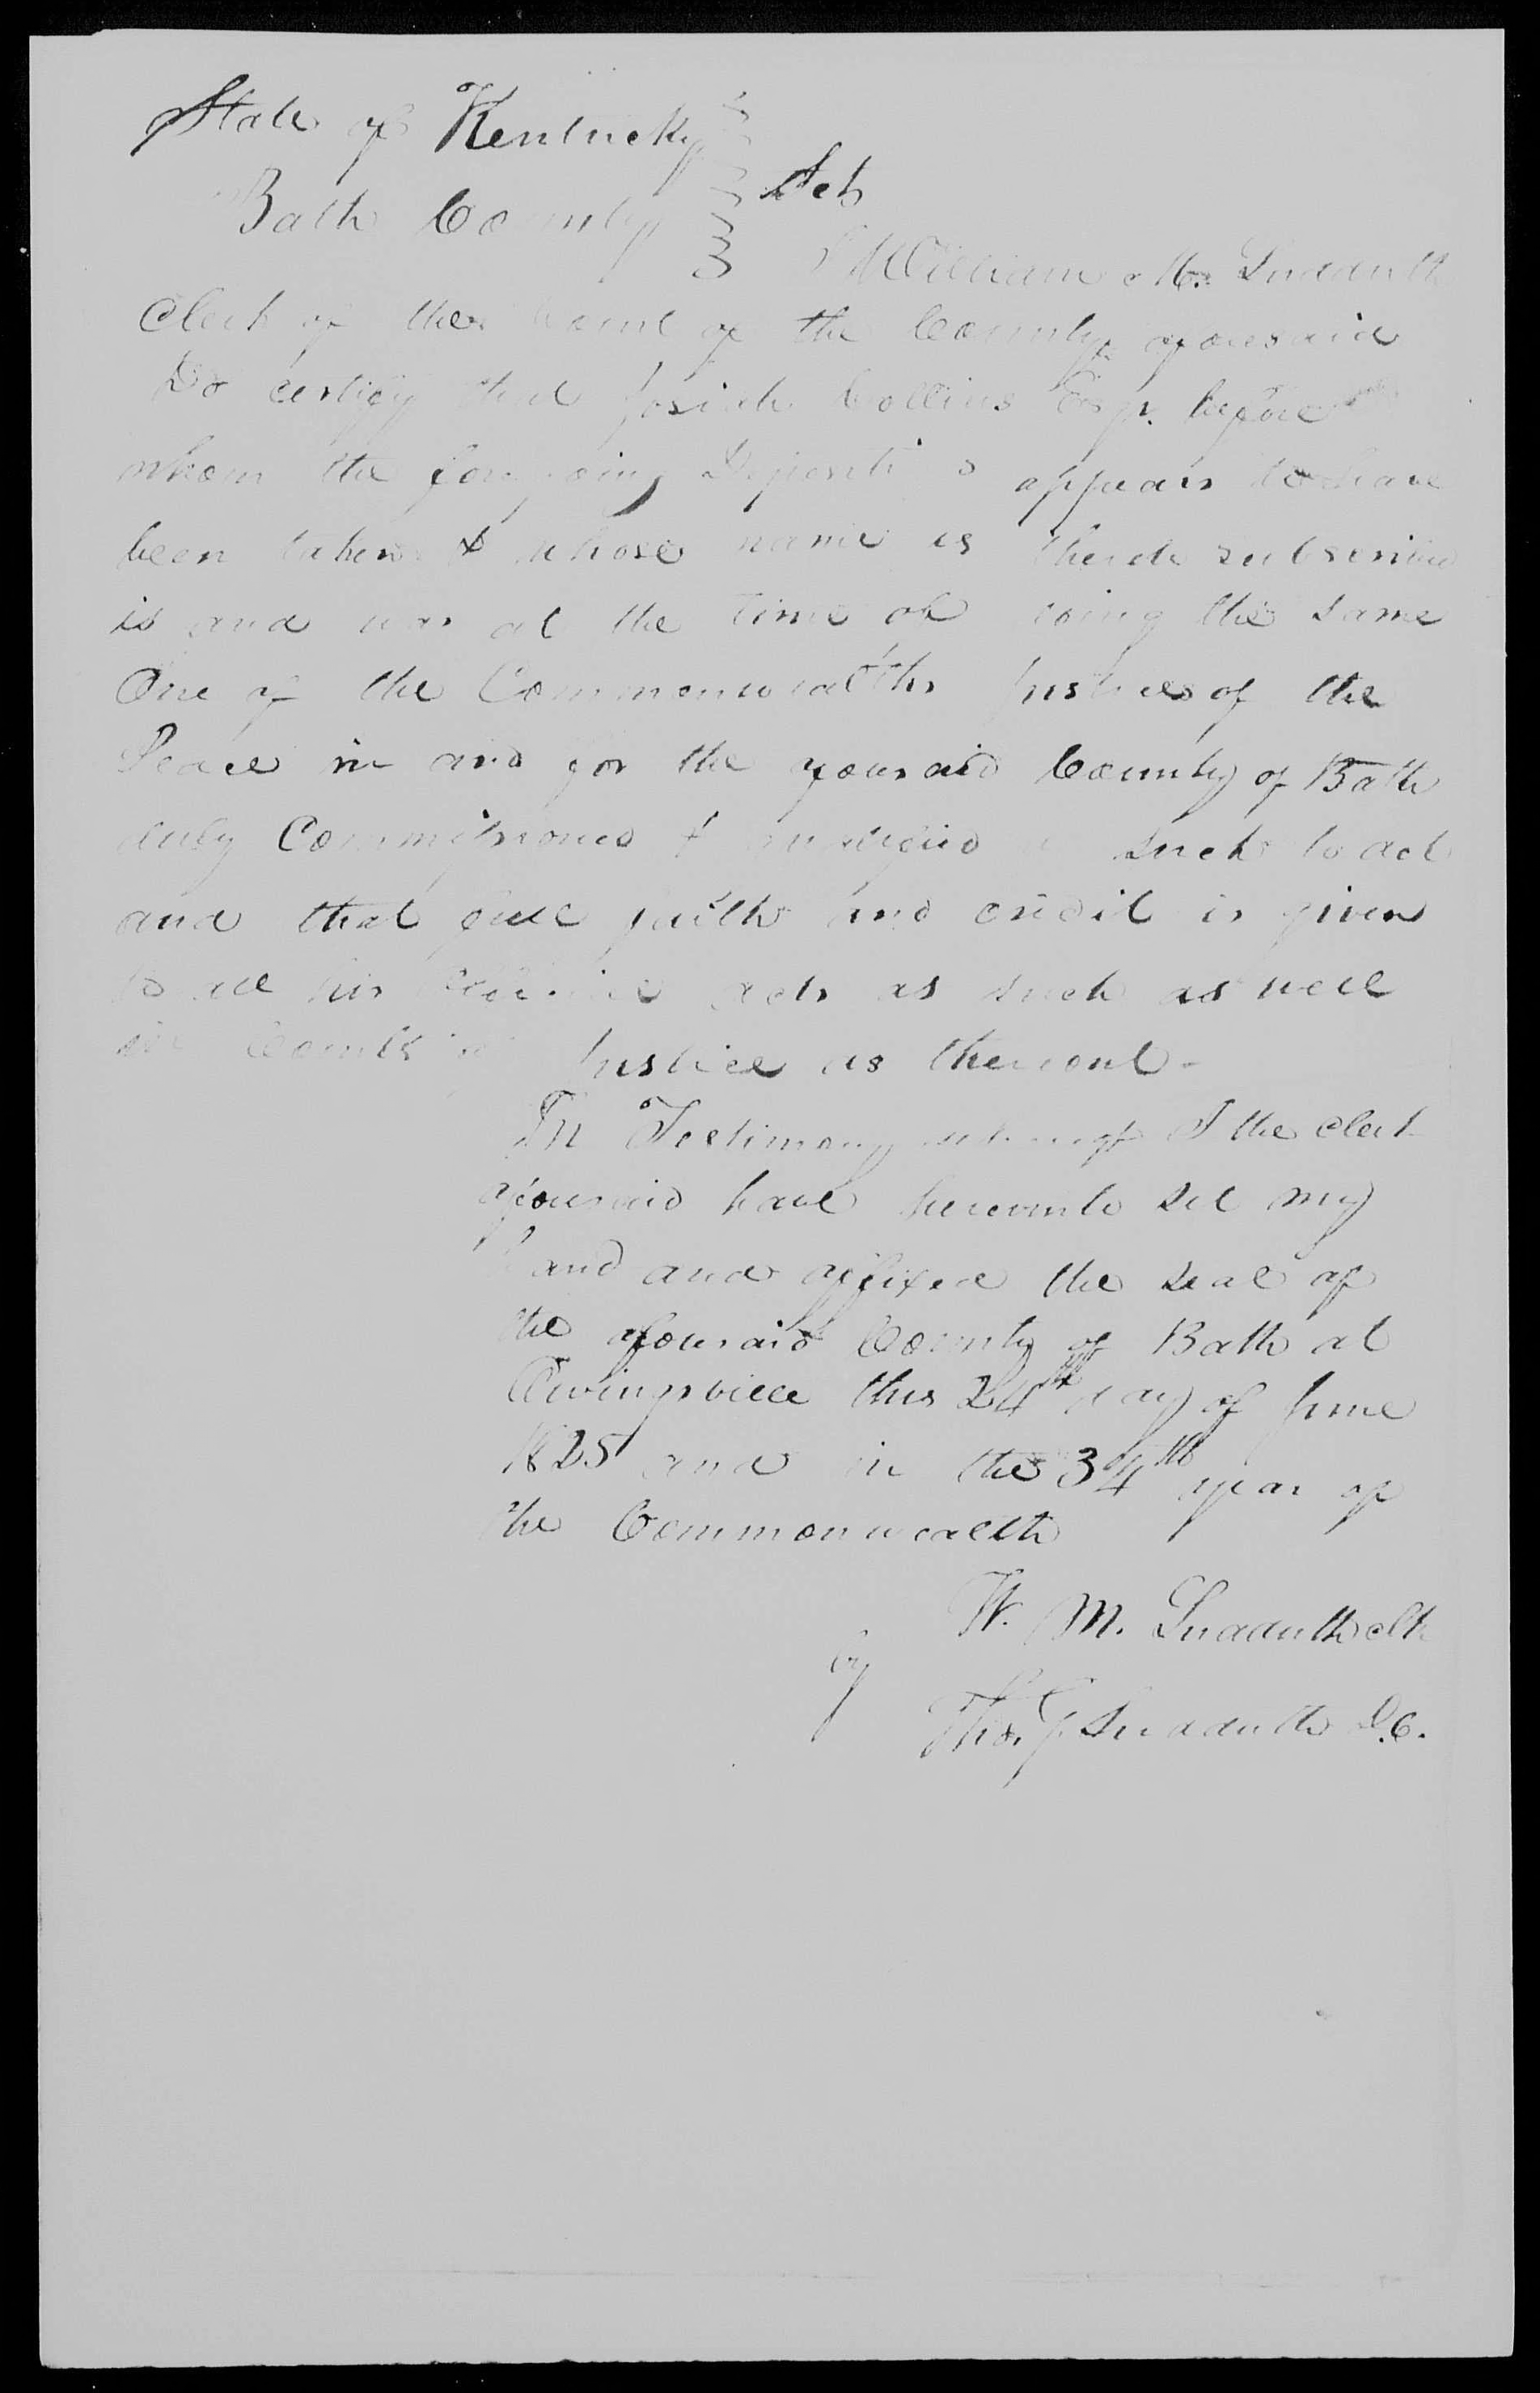 Affidavit of Mary Yarborough in support of a Pension Claim for John Bailey, 20 June 1825, page 3